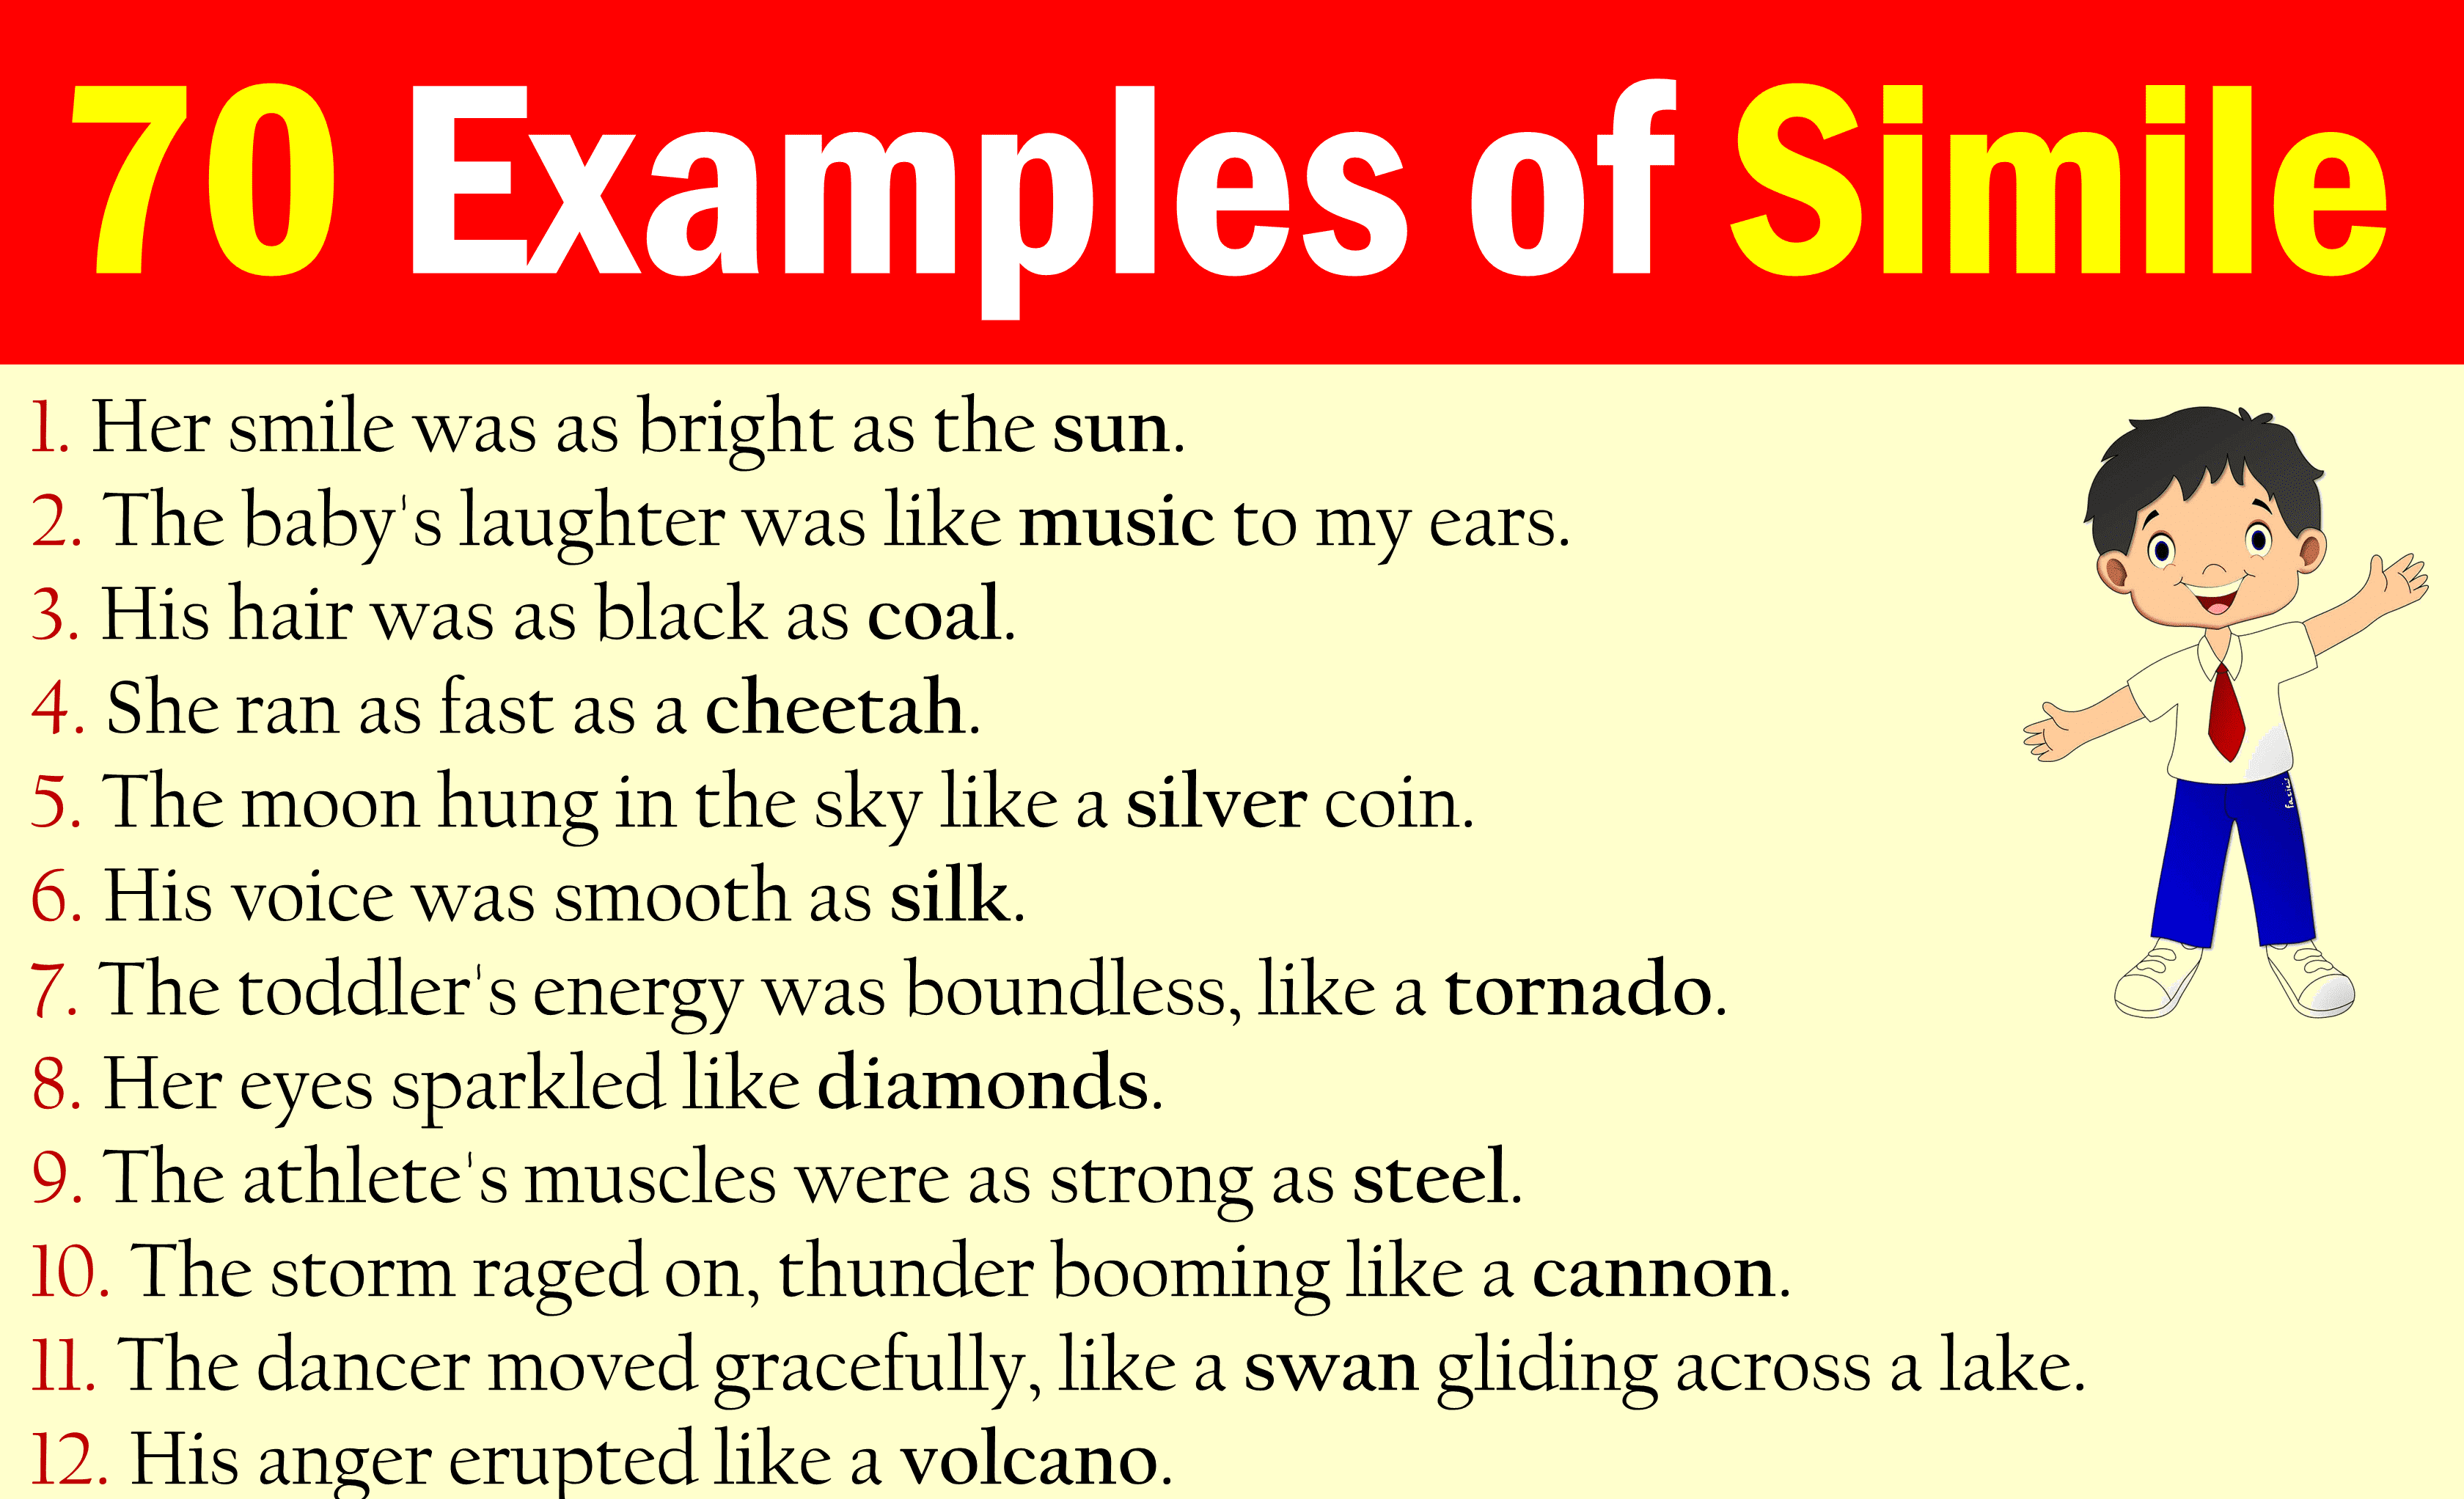 70 Example Sentences of Simile in English